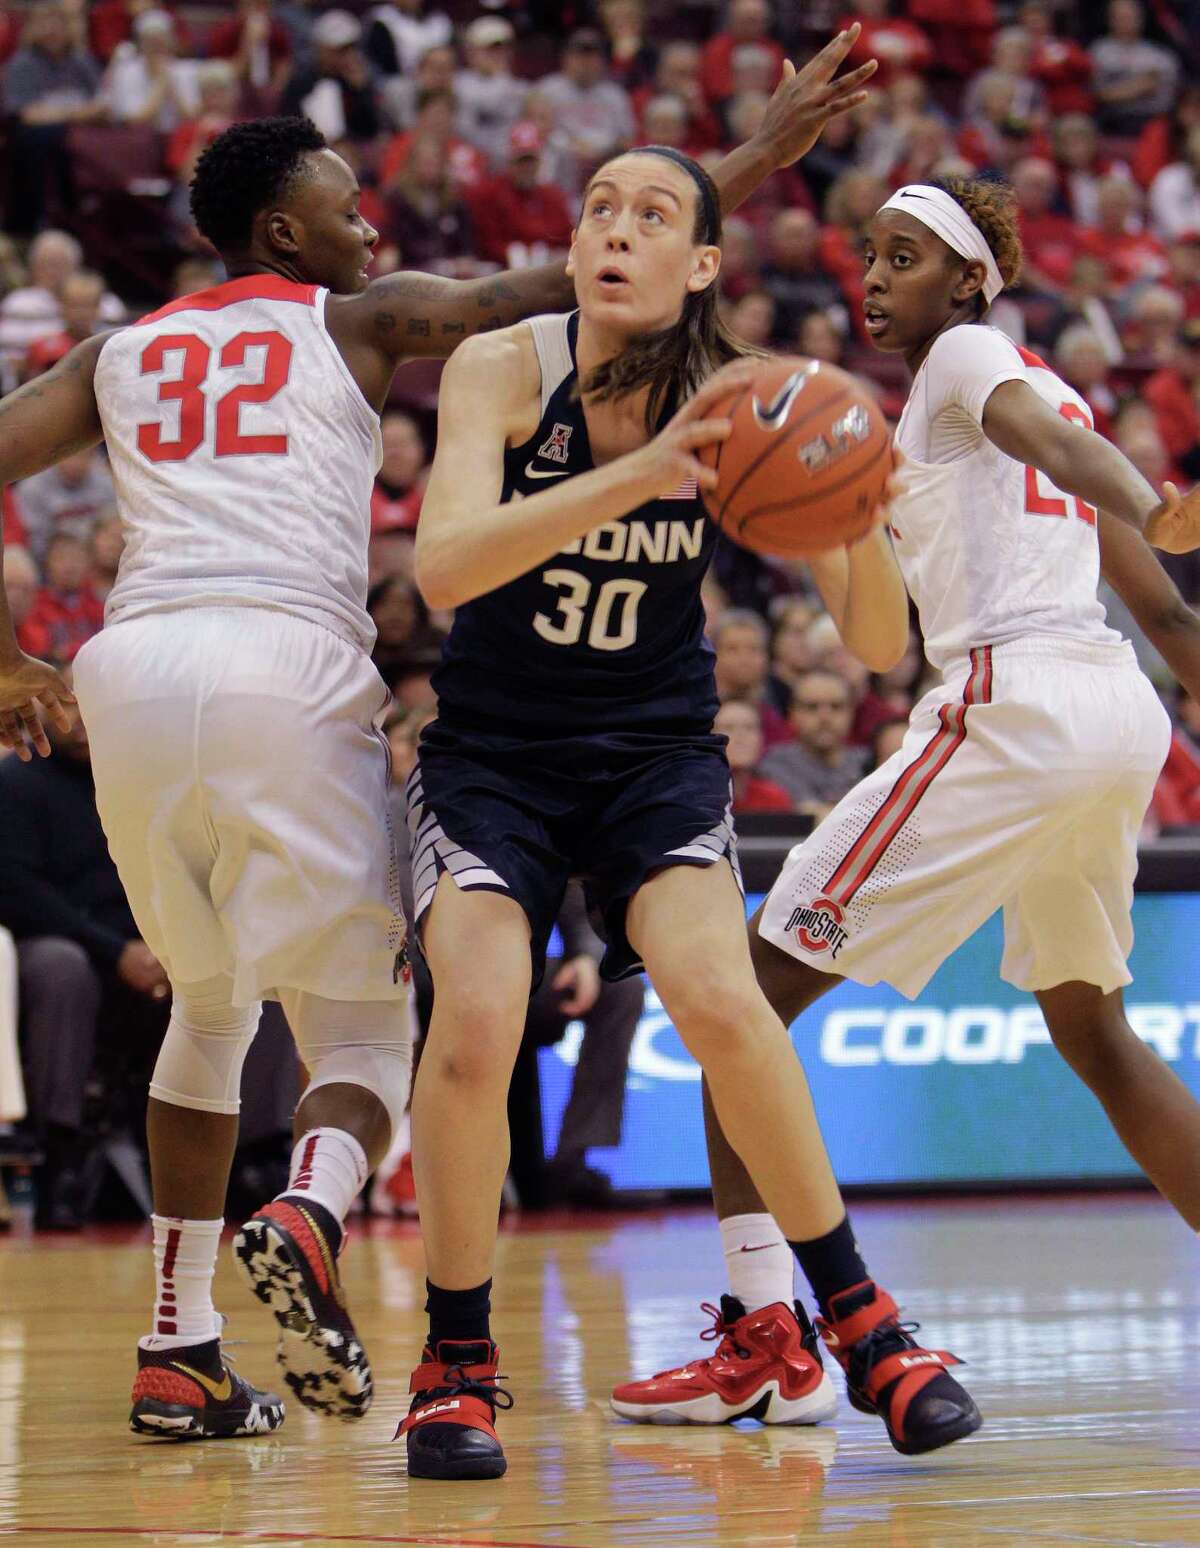 UConn’s Breanna Stewart, center, drives to the basket between Ohio State’s Shayla Cooper, left, and Alexa Hart during the first quarter Monday.